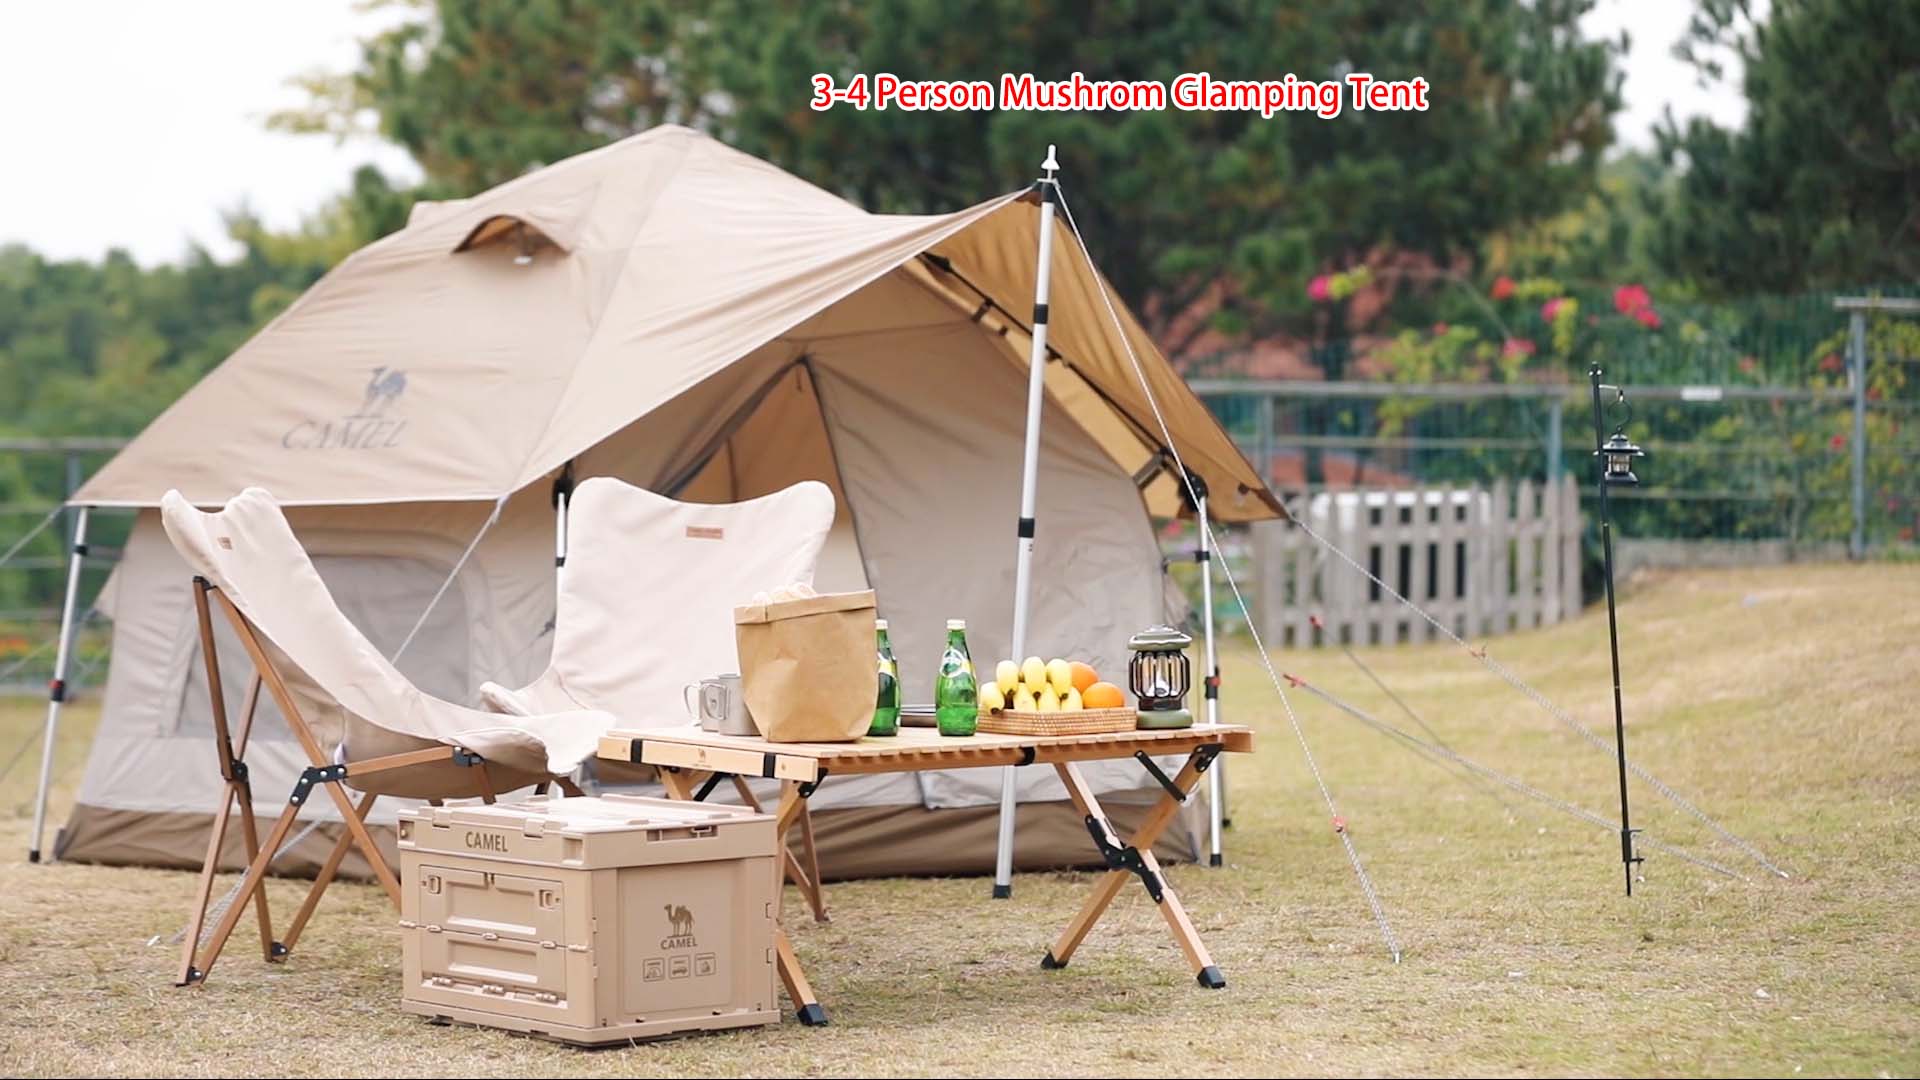 Camel 3-4 People Outdoor Glamping Tent Camping Family Waterproof Oxford Mosquito Net Luxury Custom Tent Outdoor Tent1